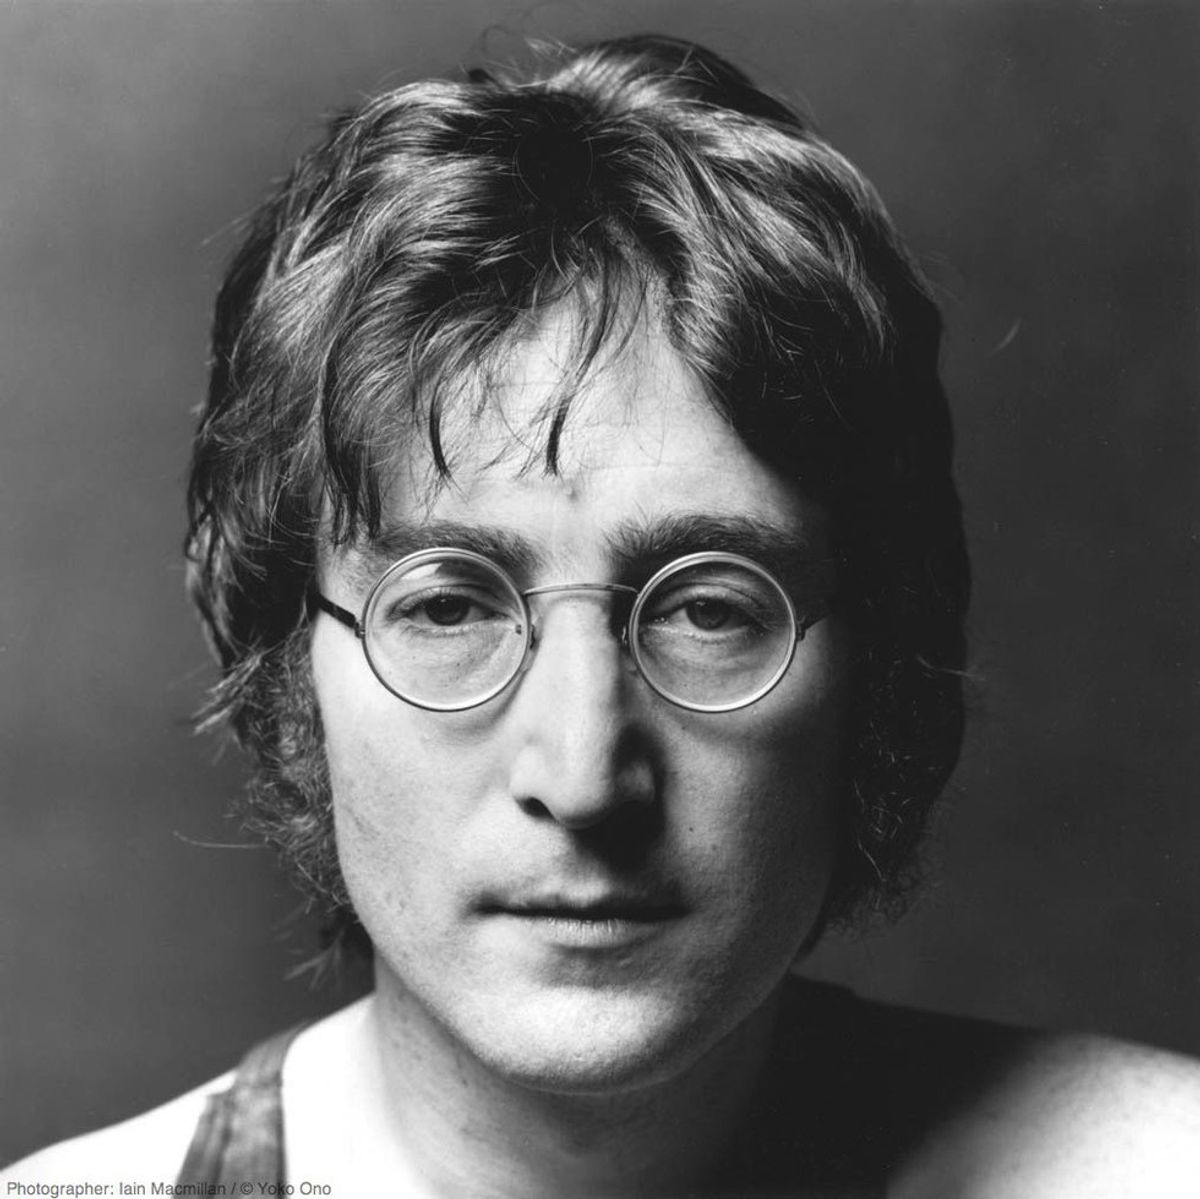 John Lennon: Why He Was One of the Greatest Hypocrites In History